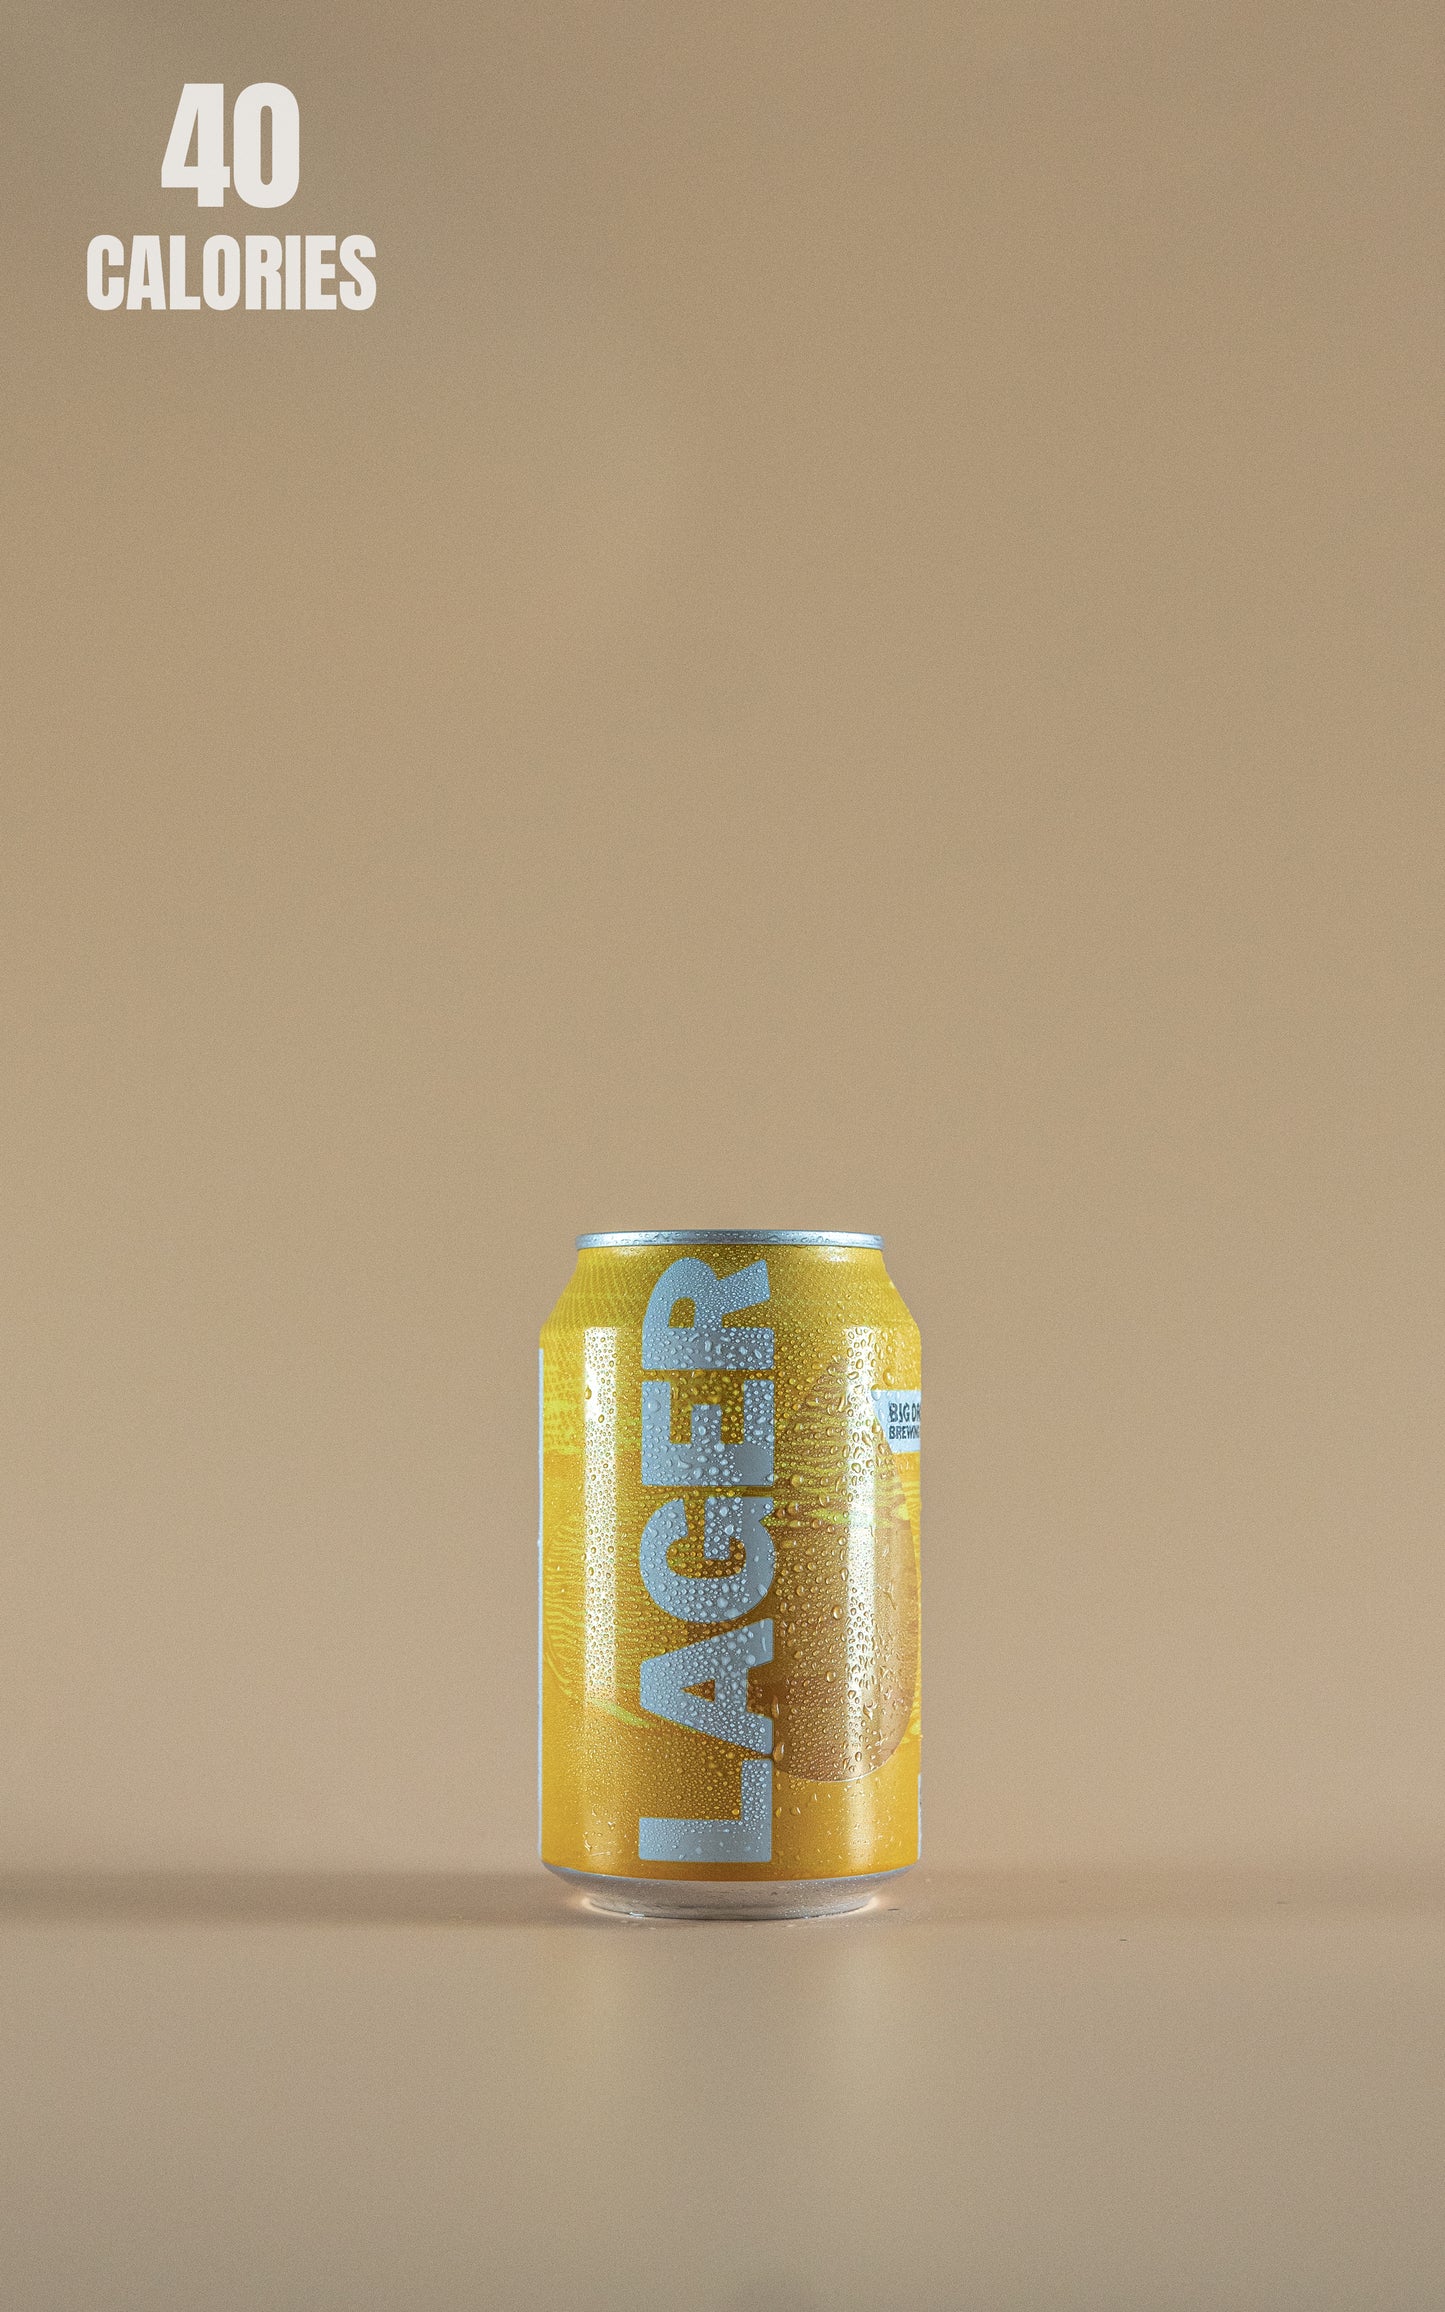 LightDrinks - Big Drop Brew Lager Cans 0.5% - 330ml